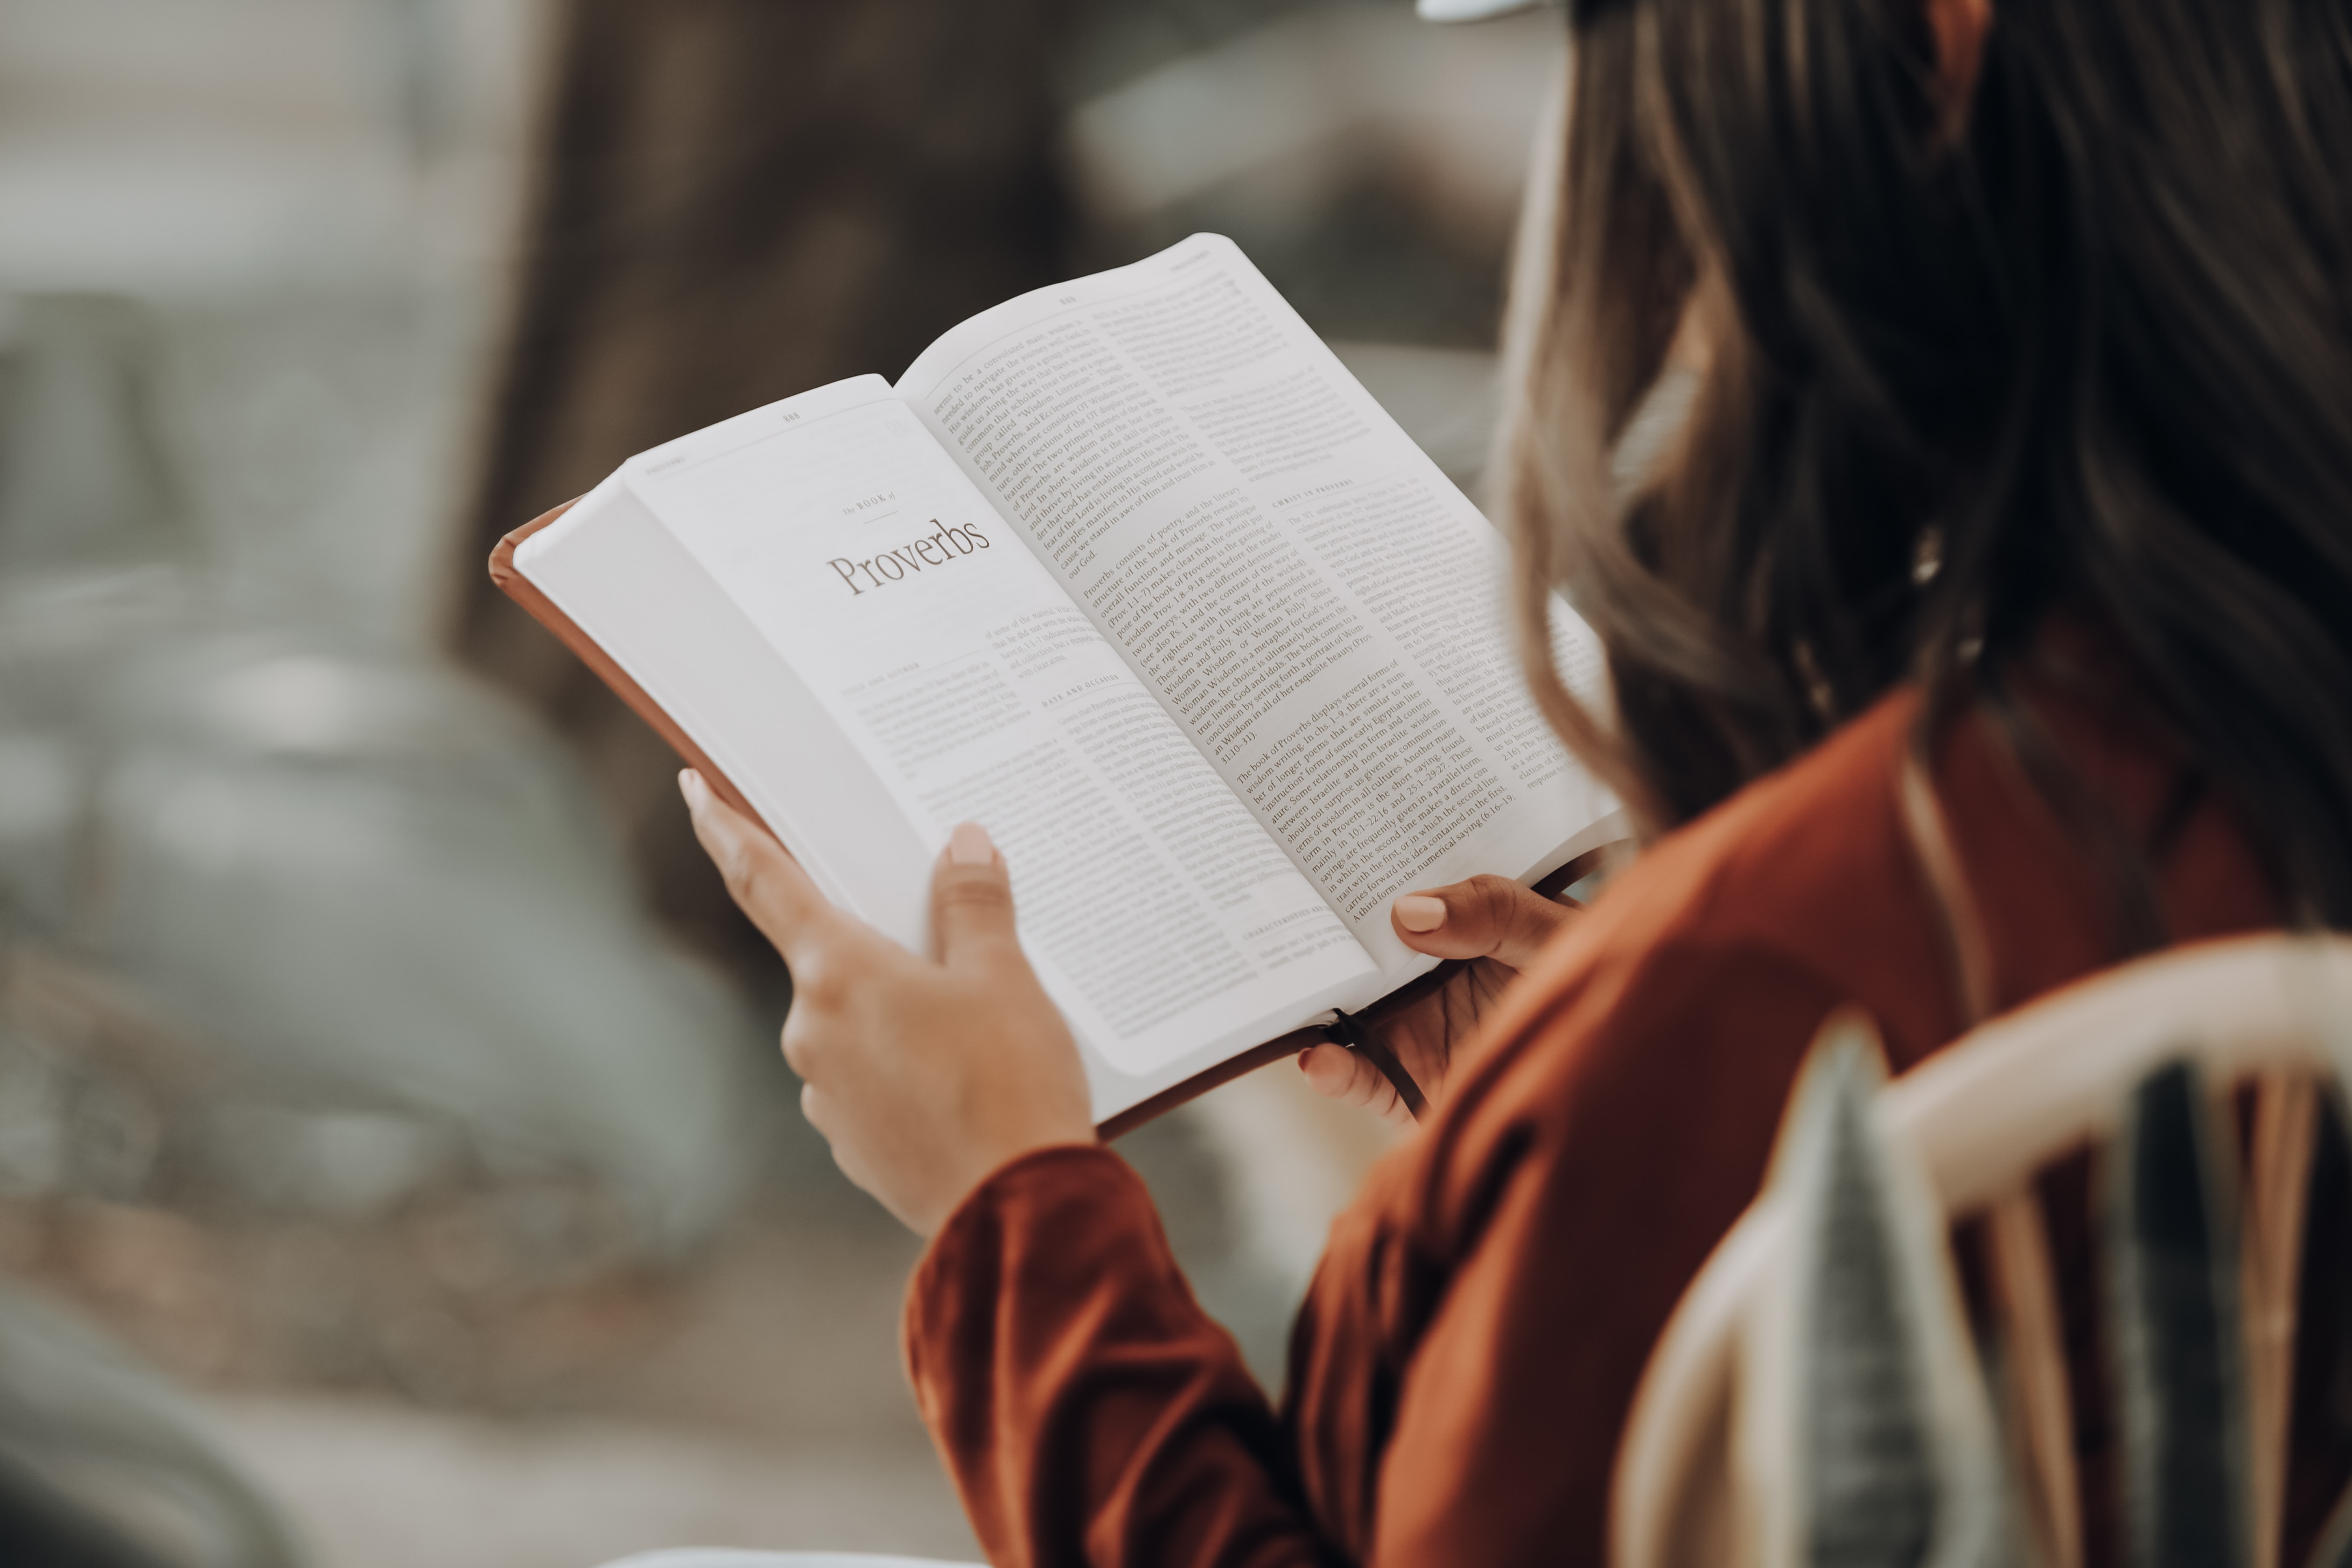 A woman reads The Proverbs in her Bible. In this article we explore why the Proverbs were given to us by God and why they are so important to our lives.